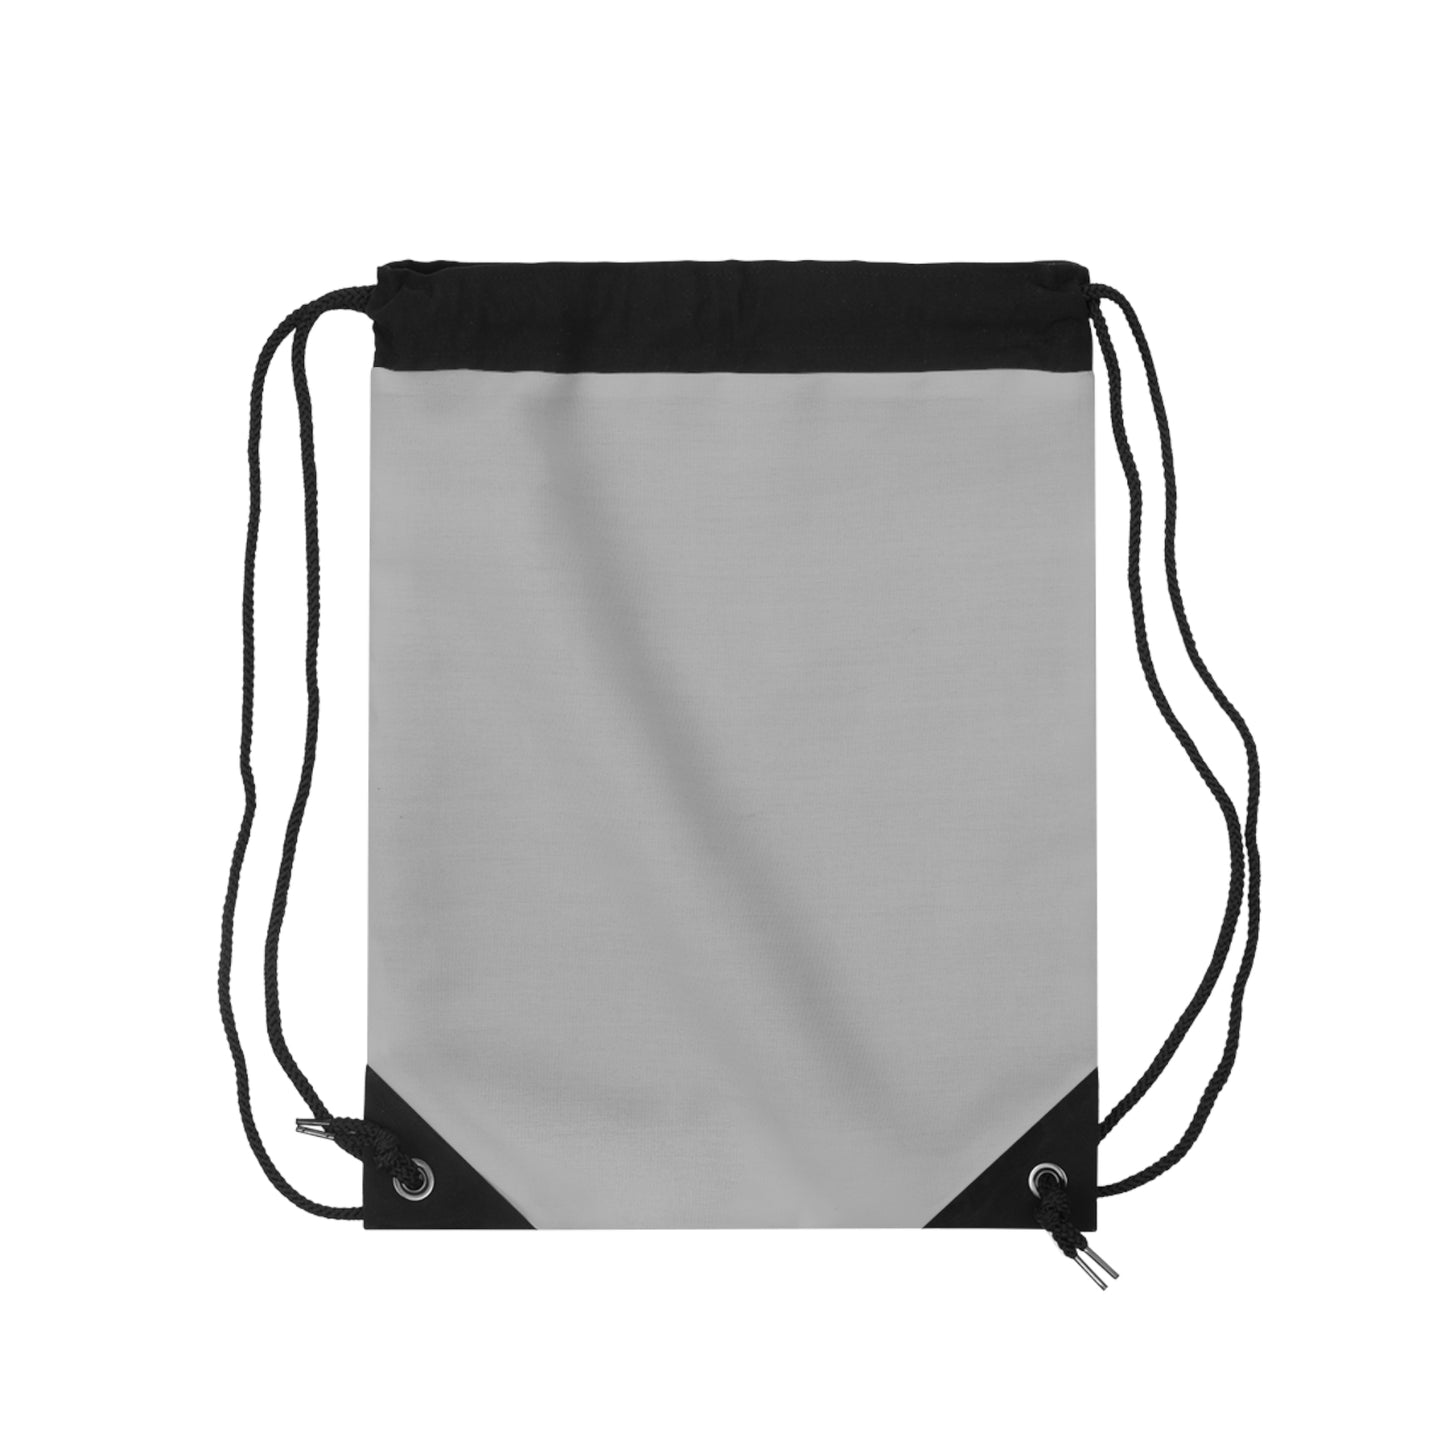 Divinely Inspired Purposefully Created Drawstring Bag